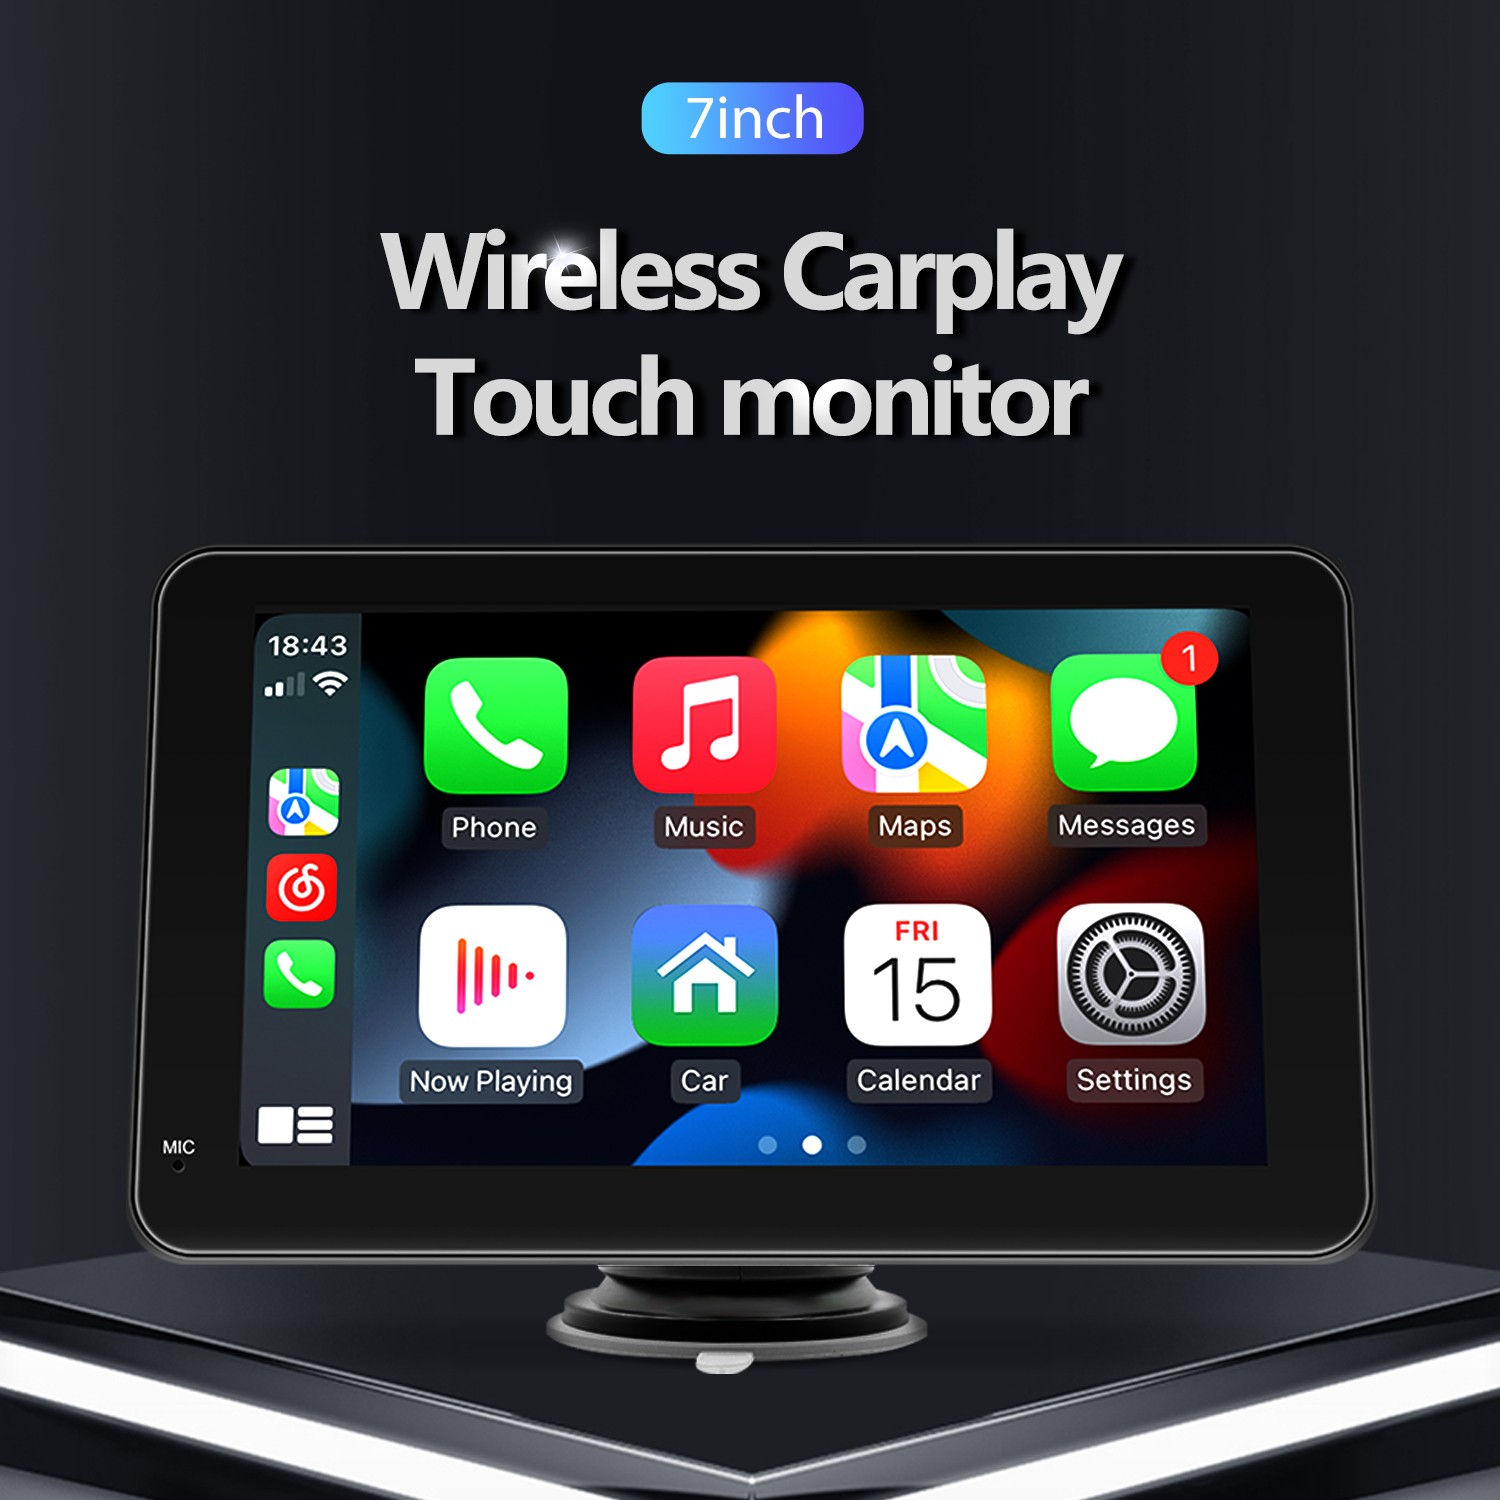 SPECIAL** Car Stereo with Apple CarPlay / Android Auto + HD Camera